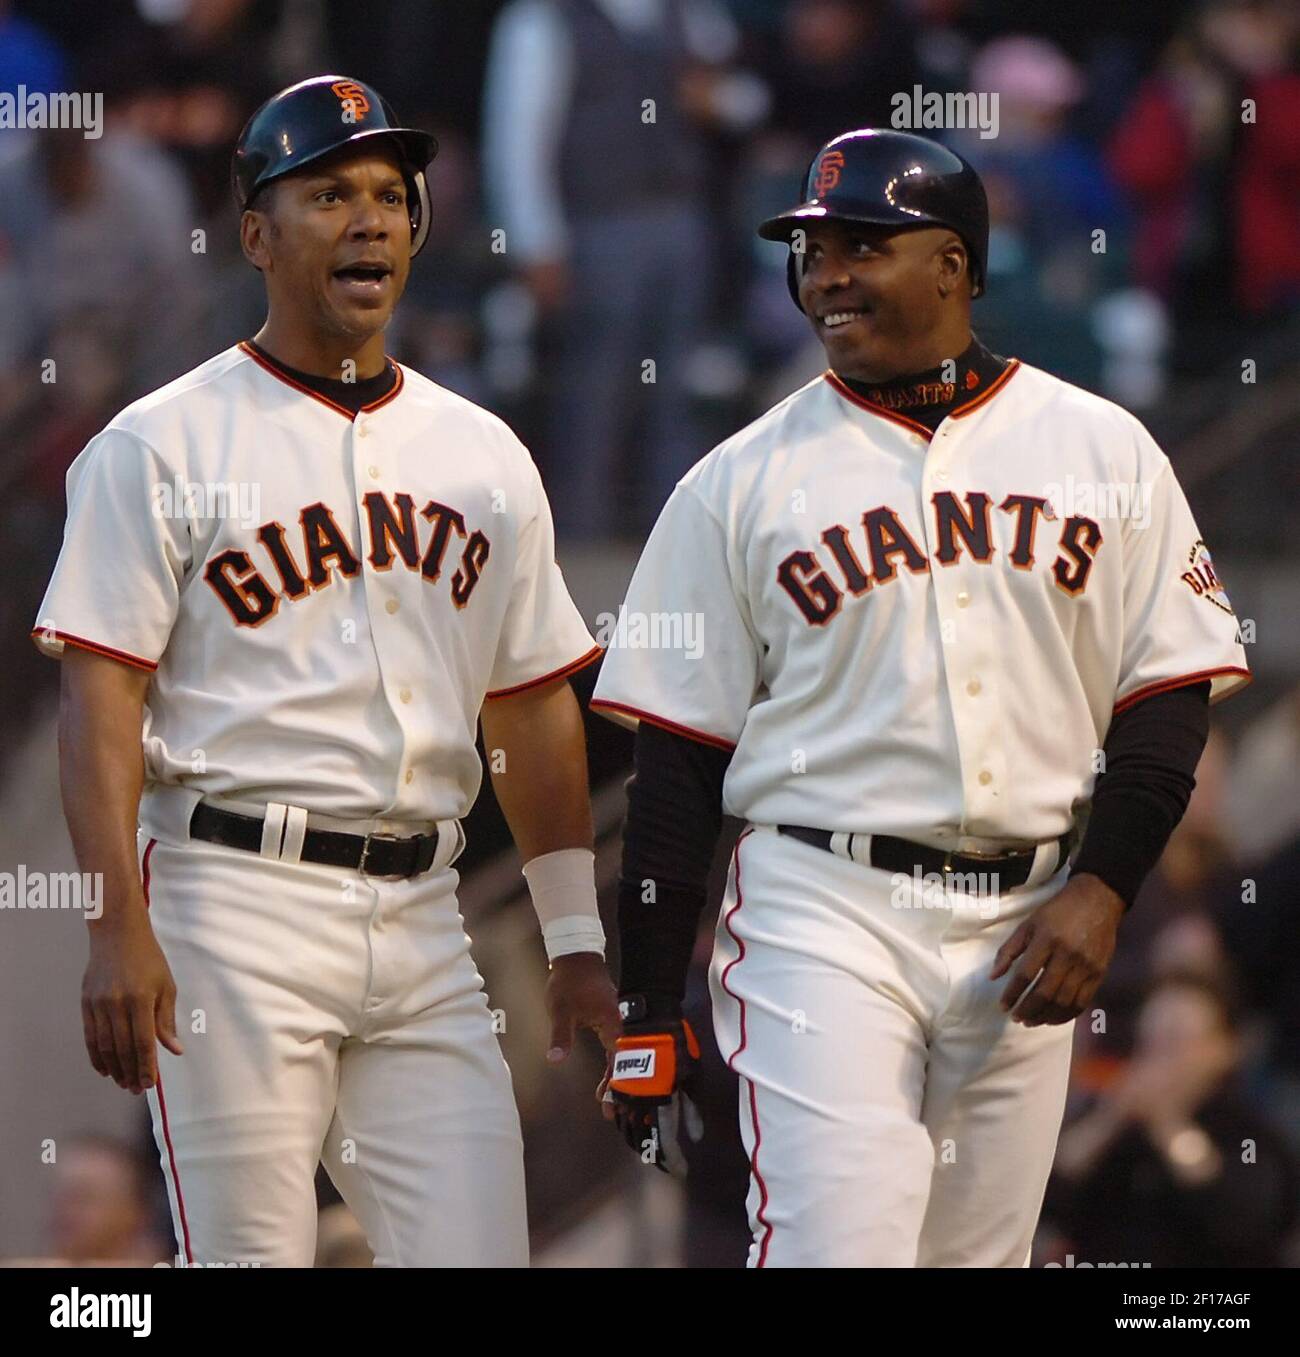 San Francisco Giants Moises Alou (left) walks back to the dugout with  teammate Barry Bonds, after hitting a 3-run home run against New York Mets  in the first inning at AT&T Park